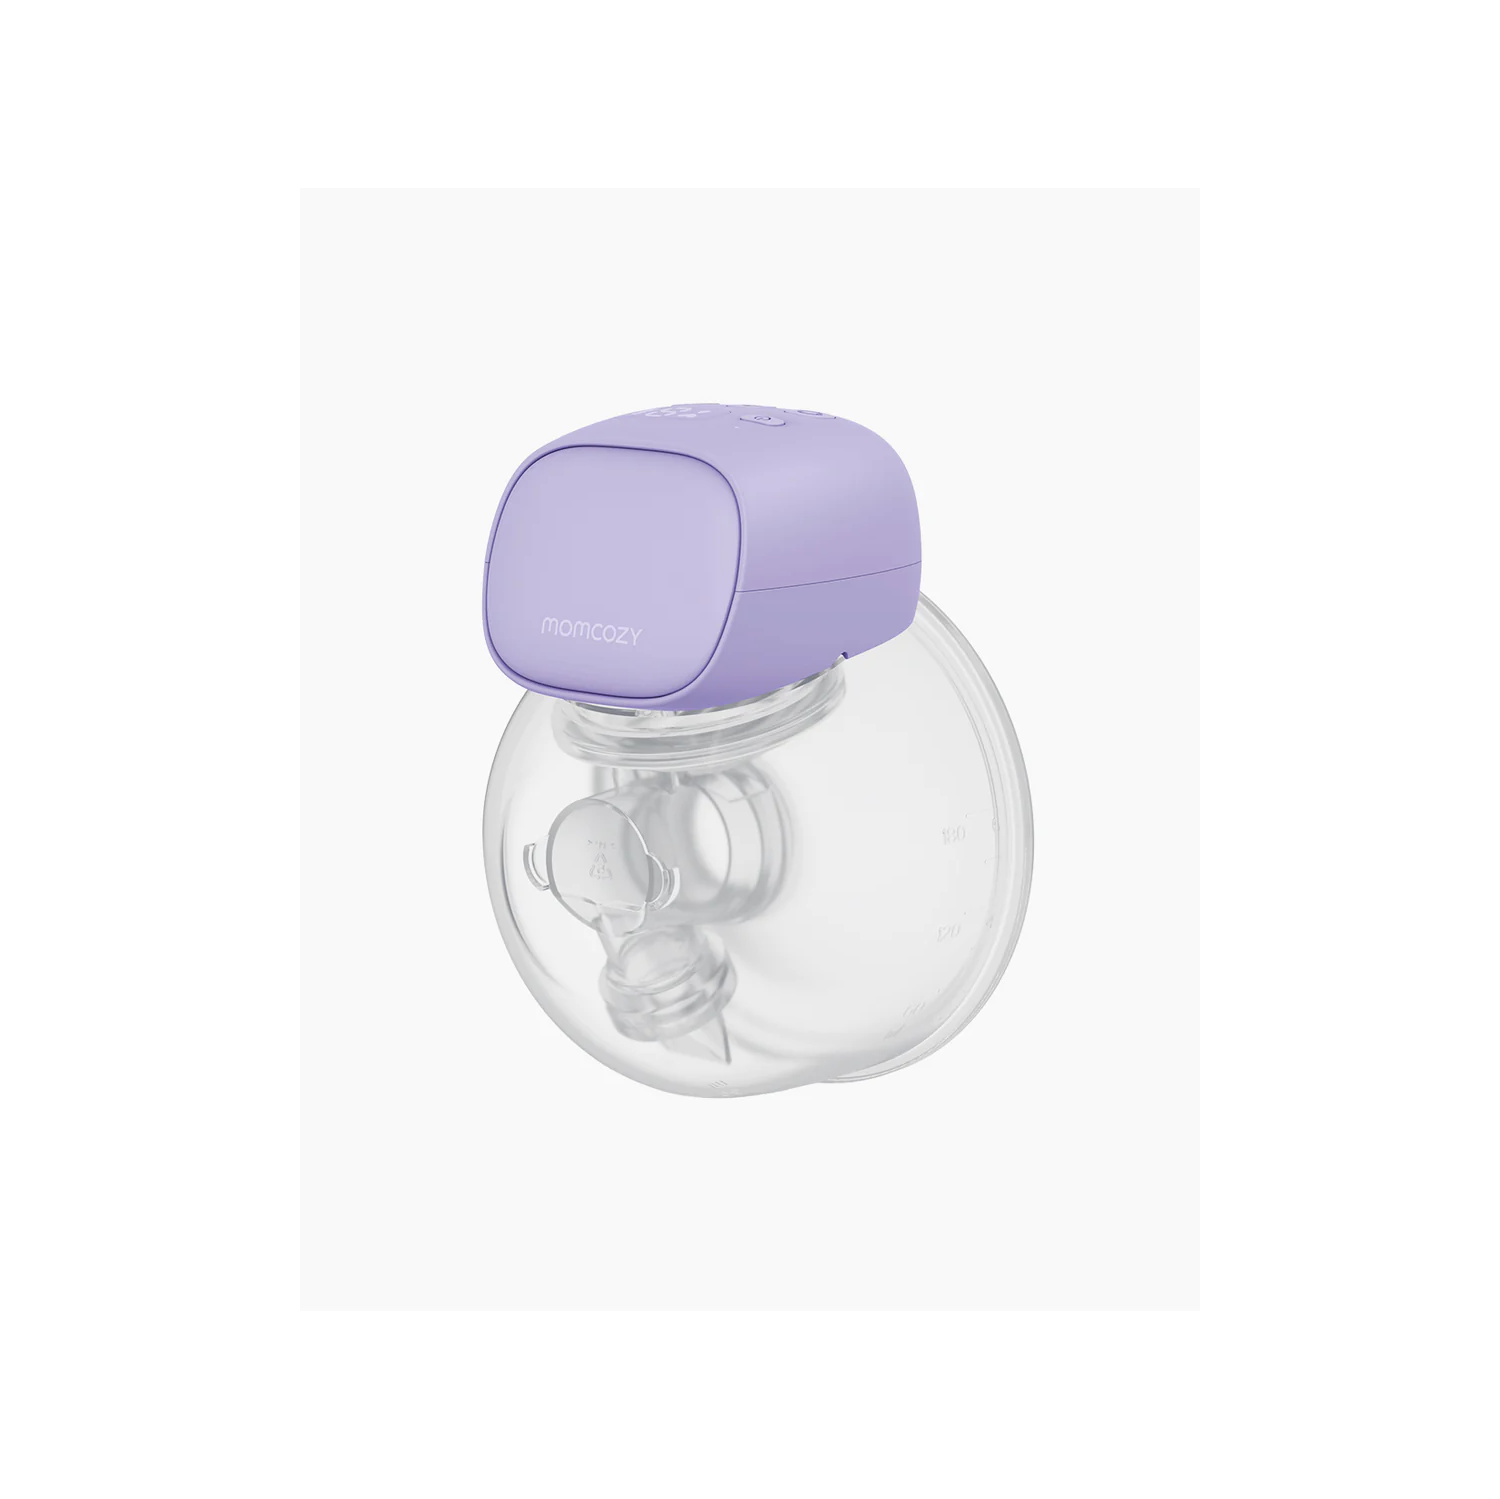 Momcozy S9 Pro Breast Pump Kshs 23,000 Less Time, More Milk - Momcozy S9  Pro wearable breast pump with 2 modes & 9 levels. Imitating the…